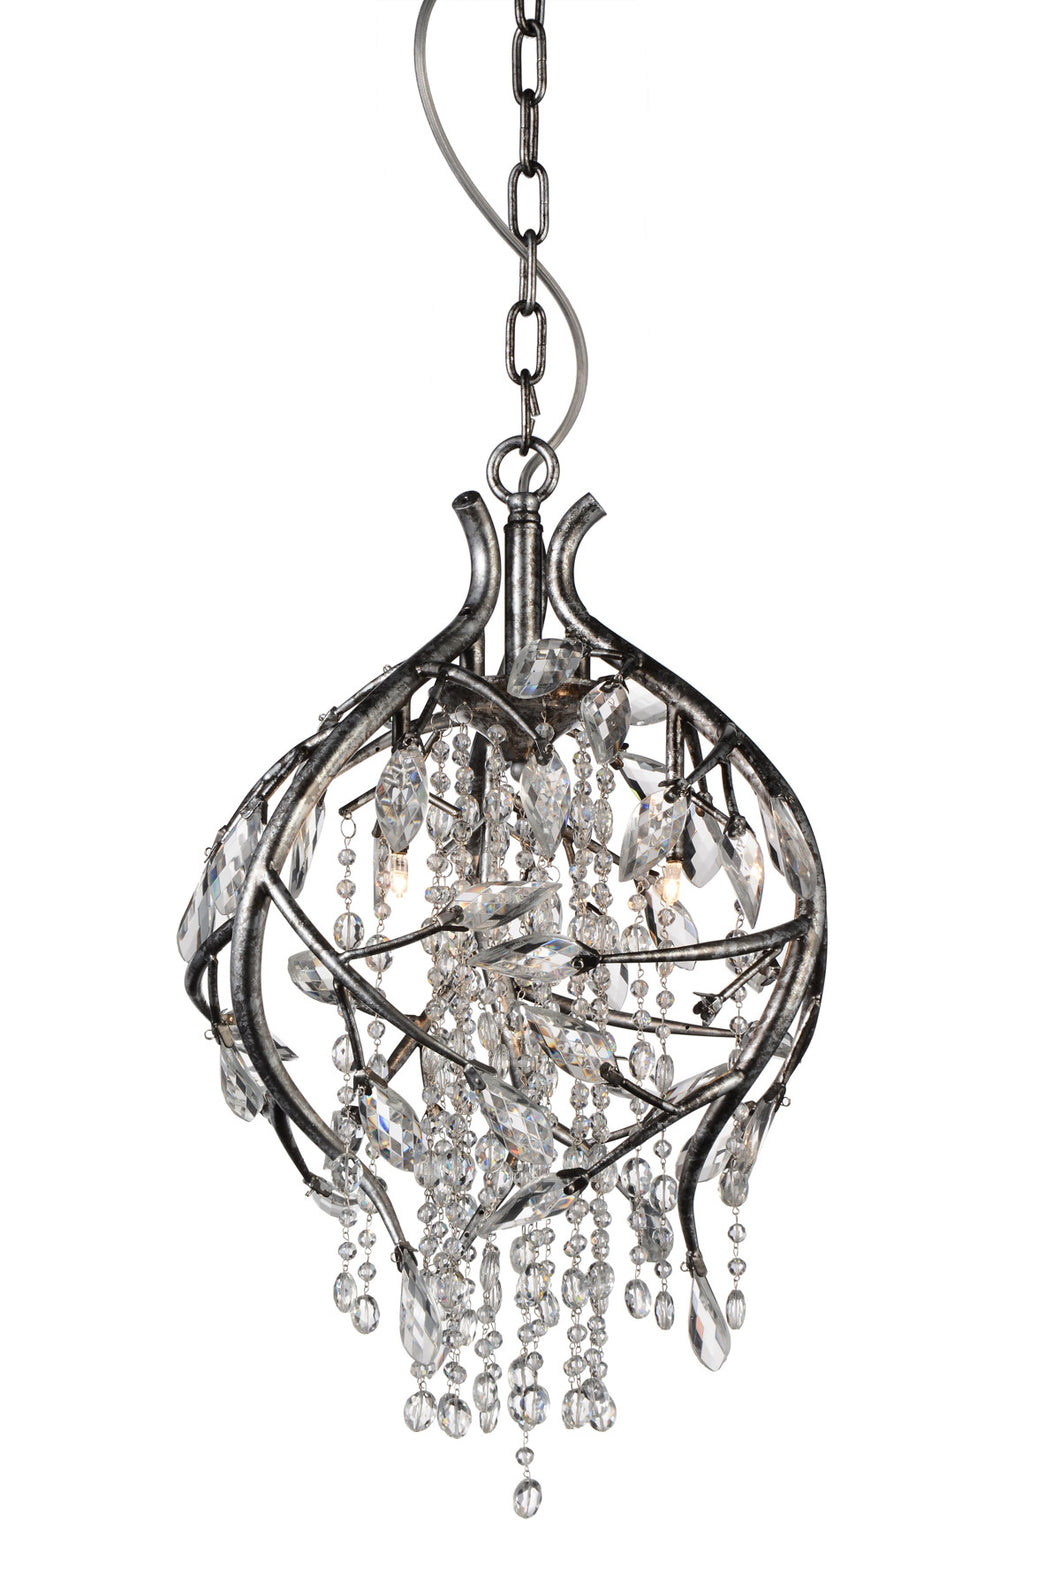 3 Light Down Chandelier with Speckled Nickel finish